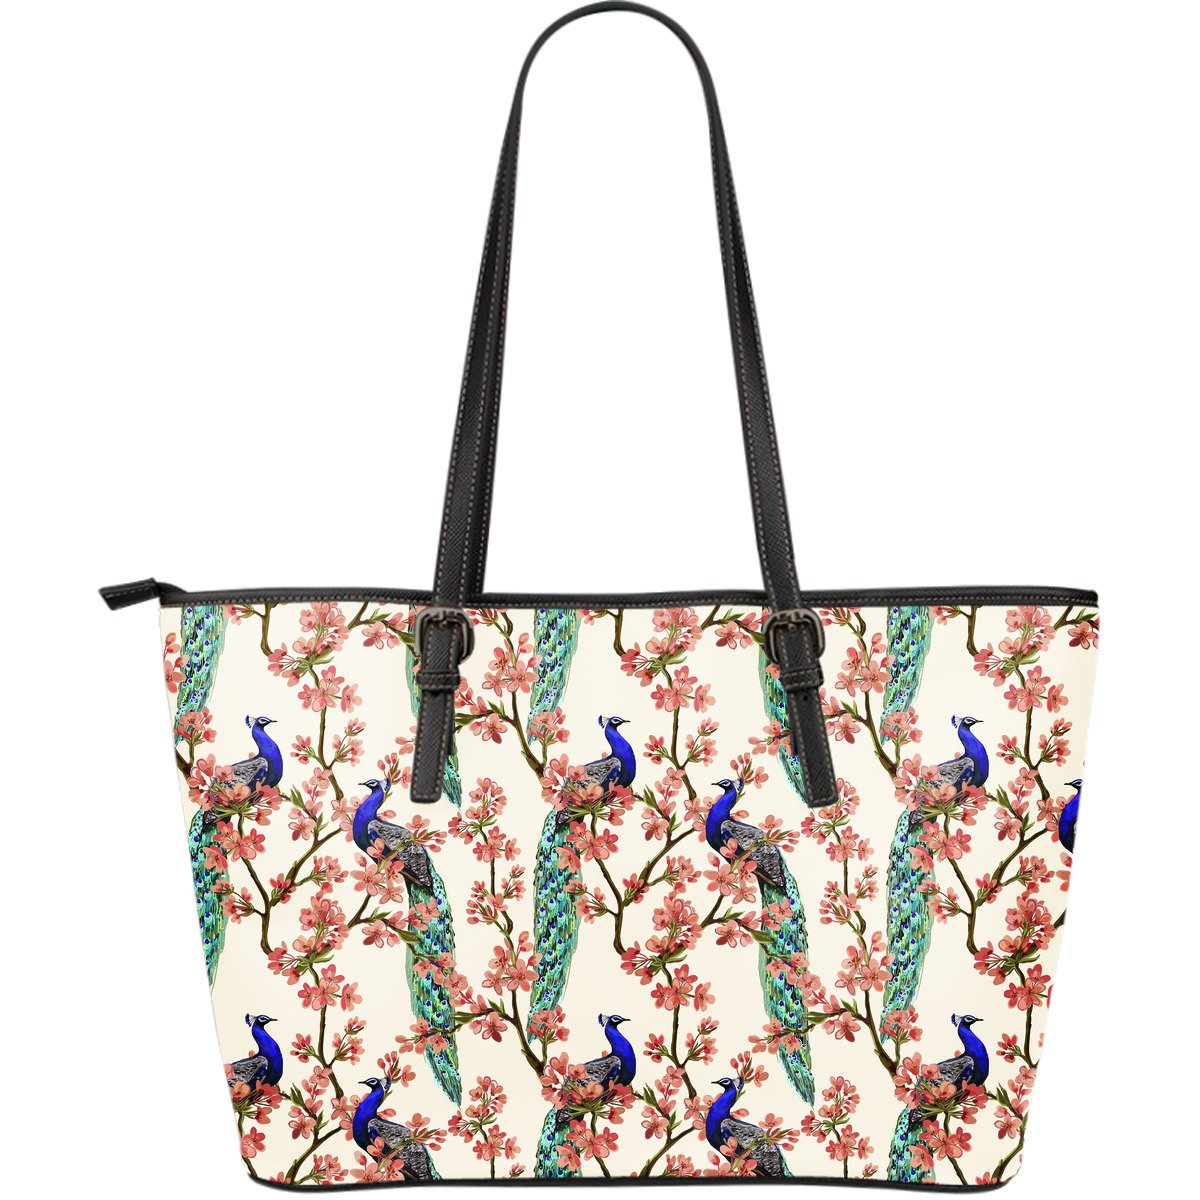 Cherry Blossom Peacock Leather Tote Bag - JorJune